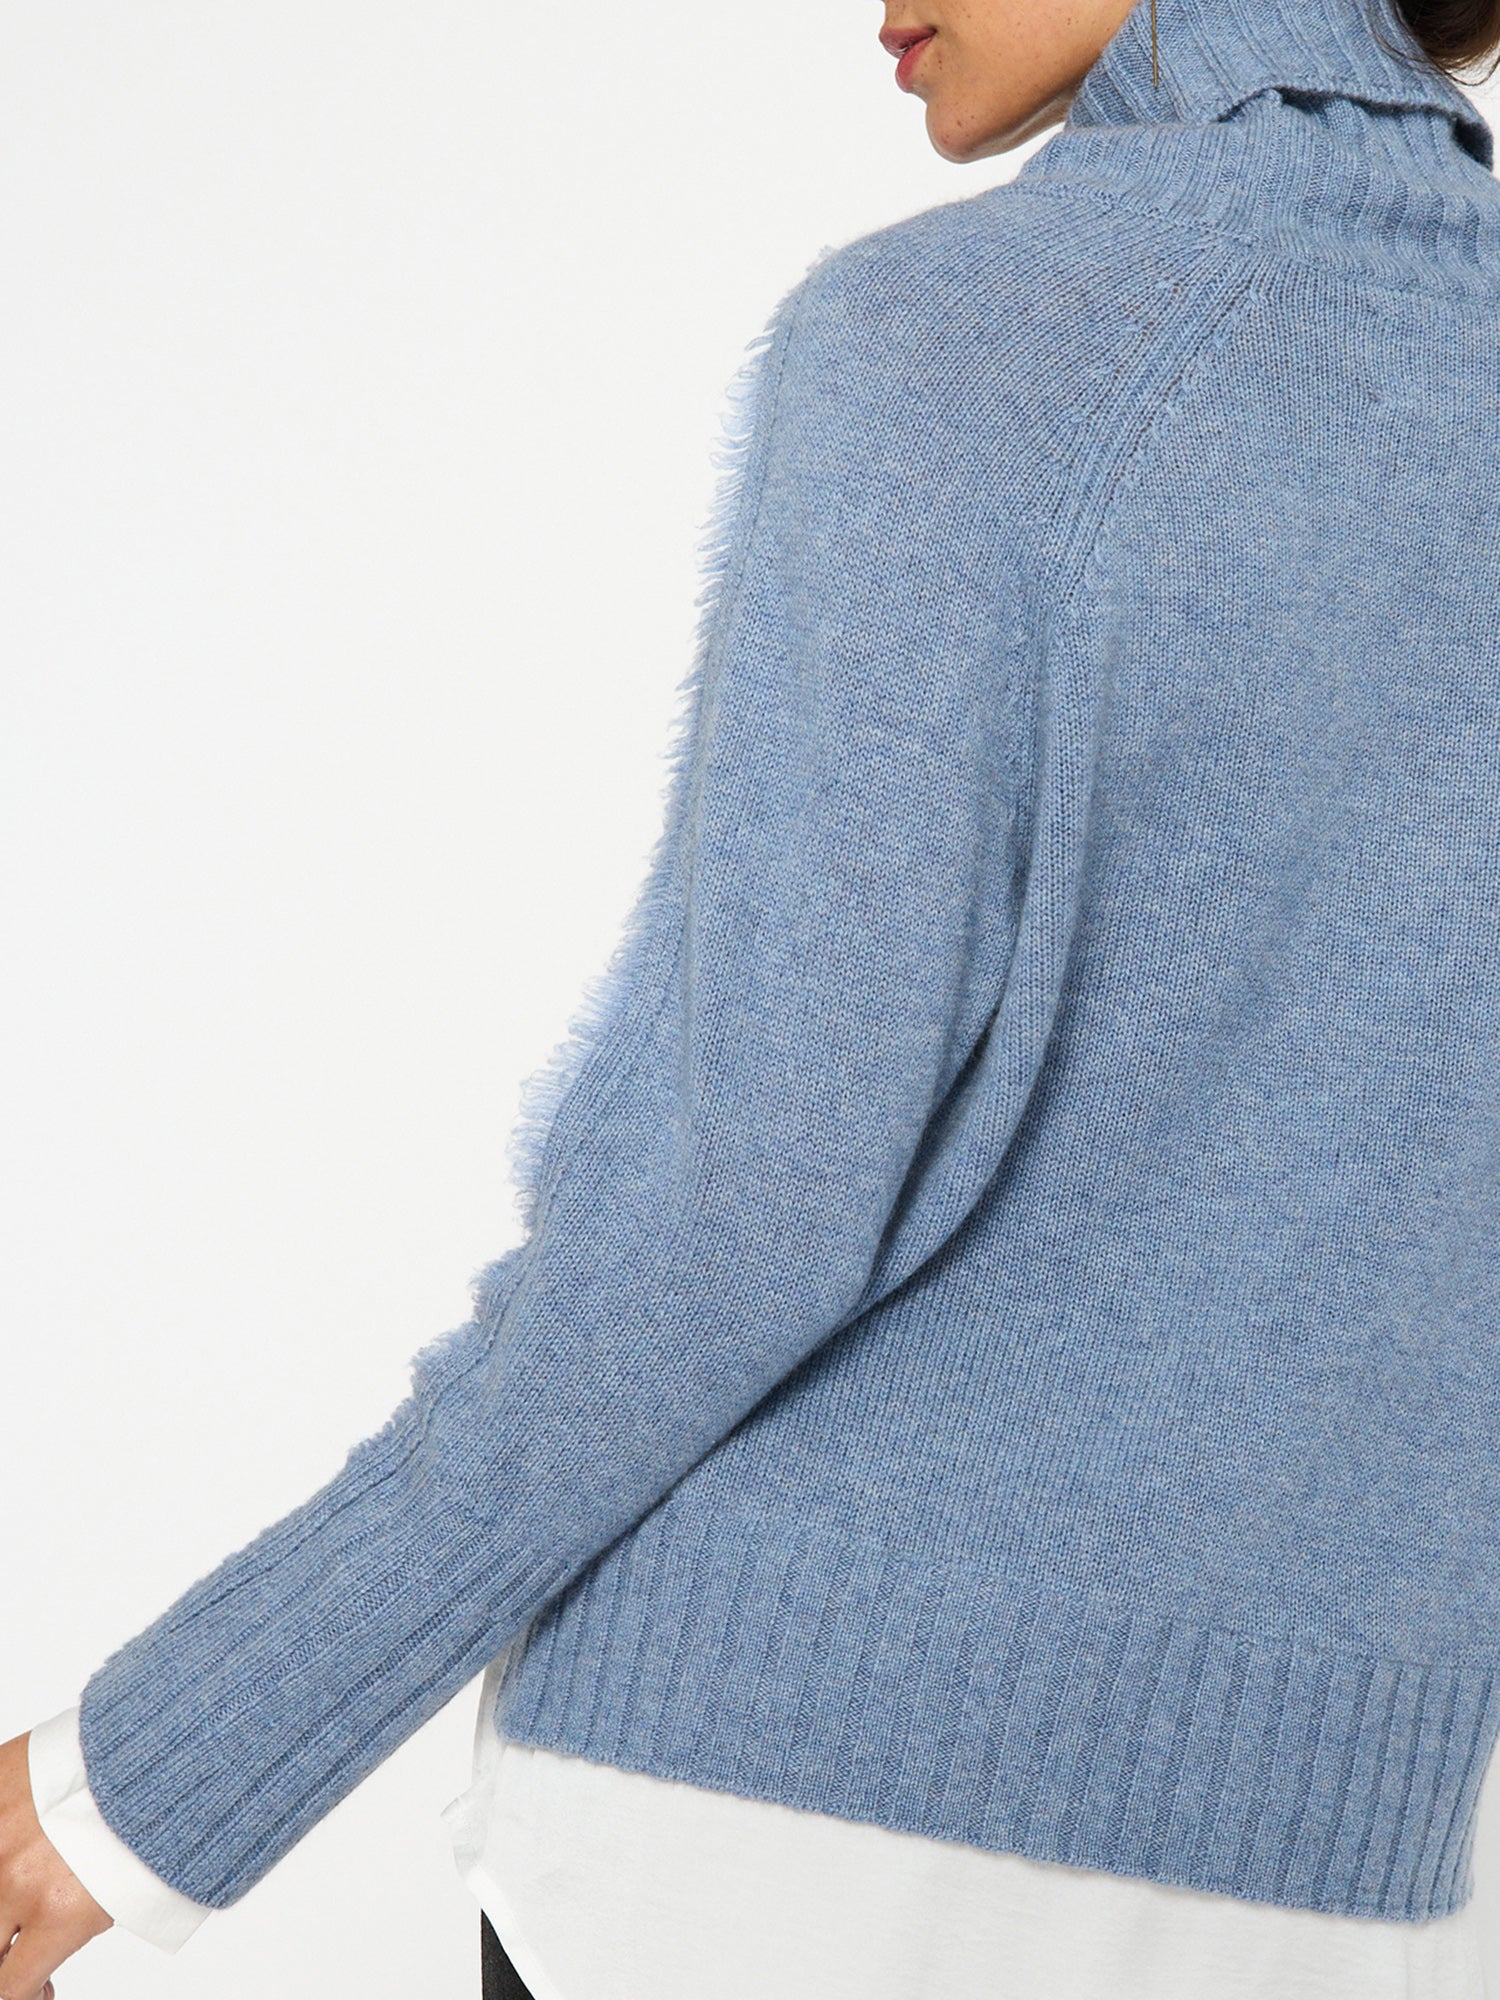 Jolie blue layered turtleneck sweater back view 2